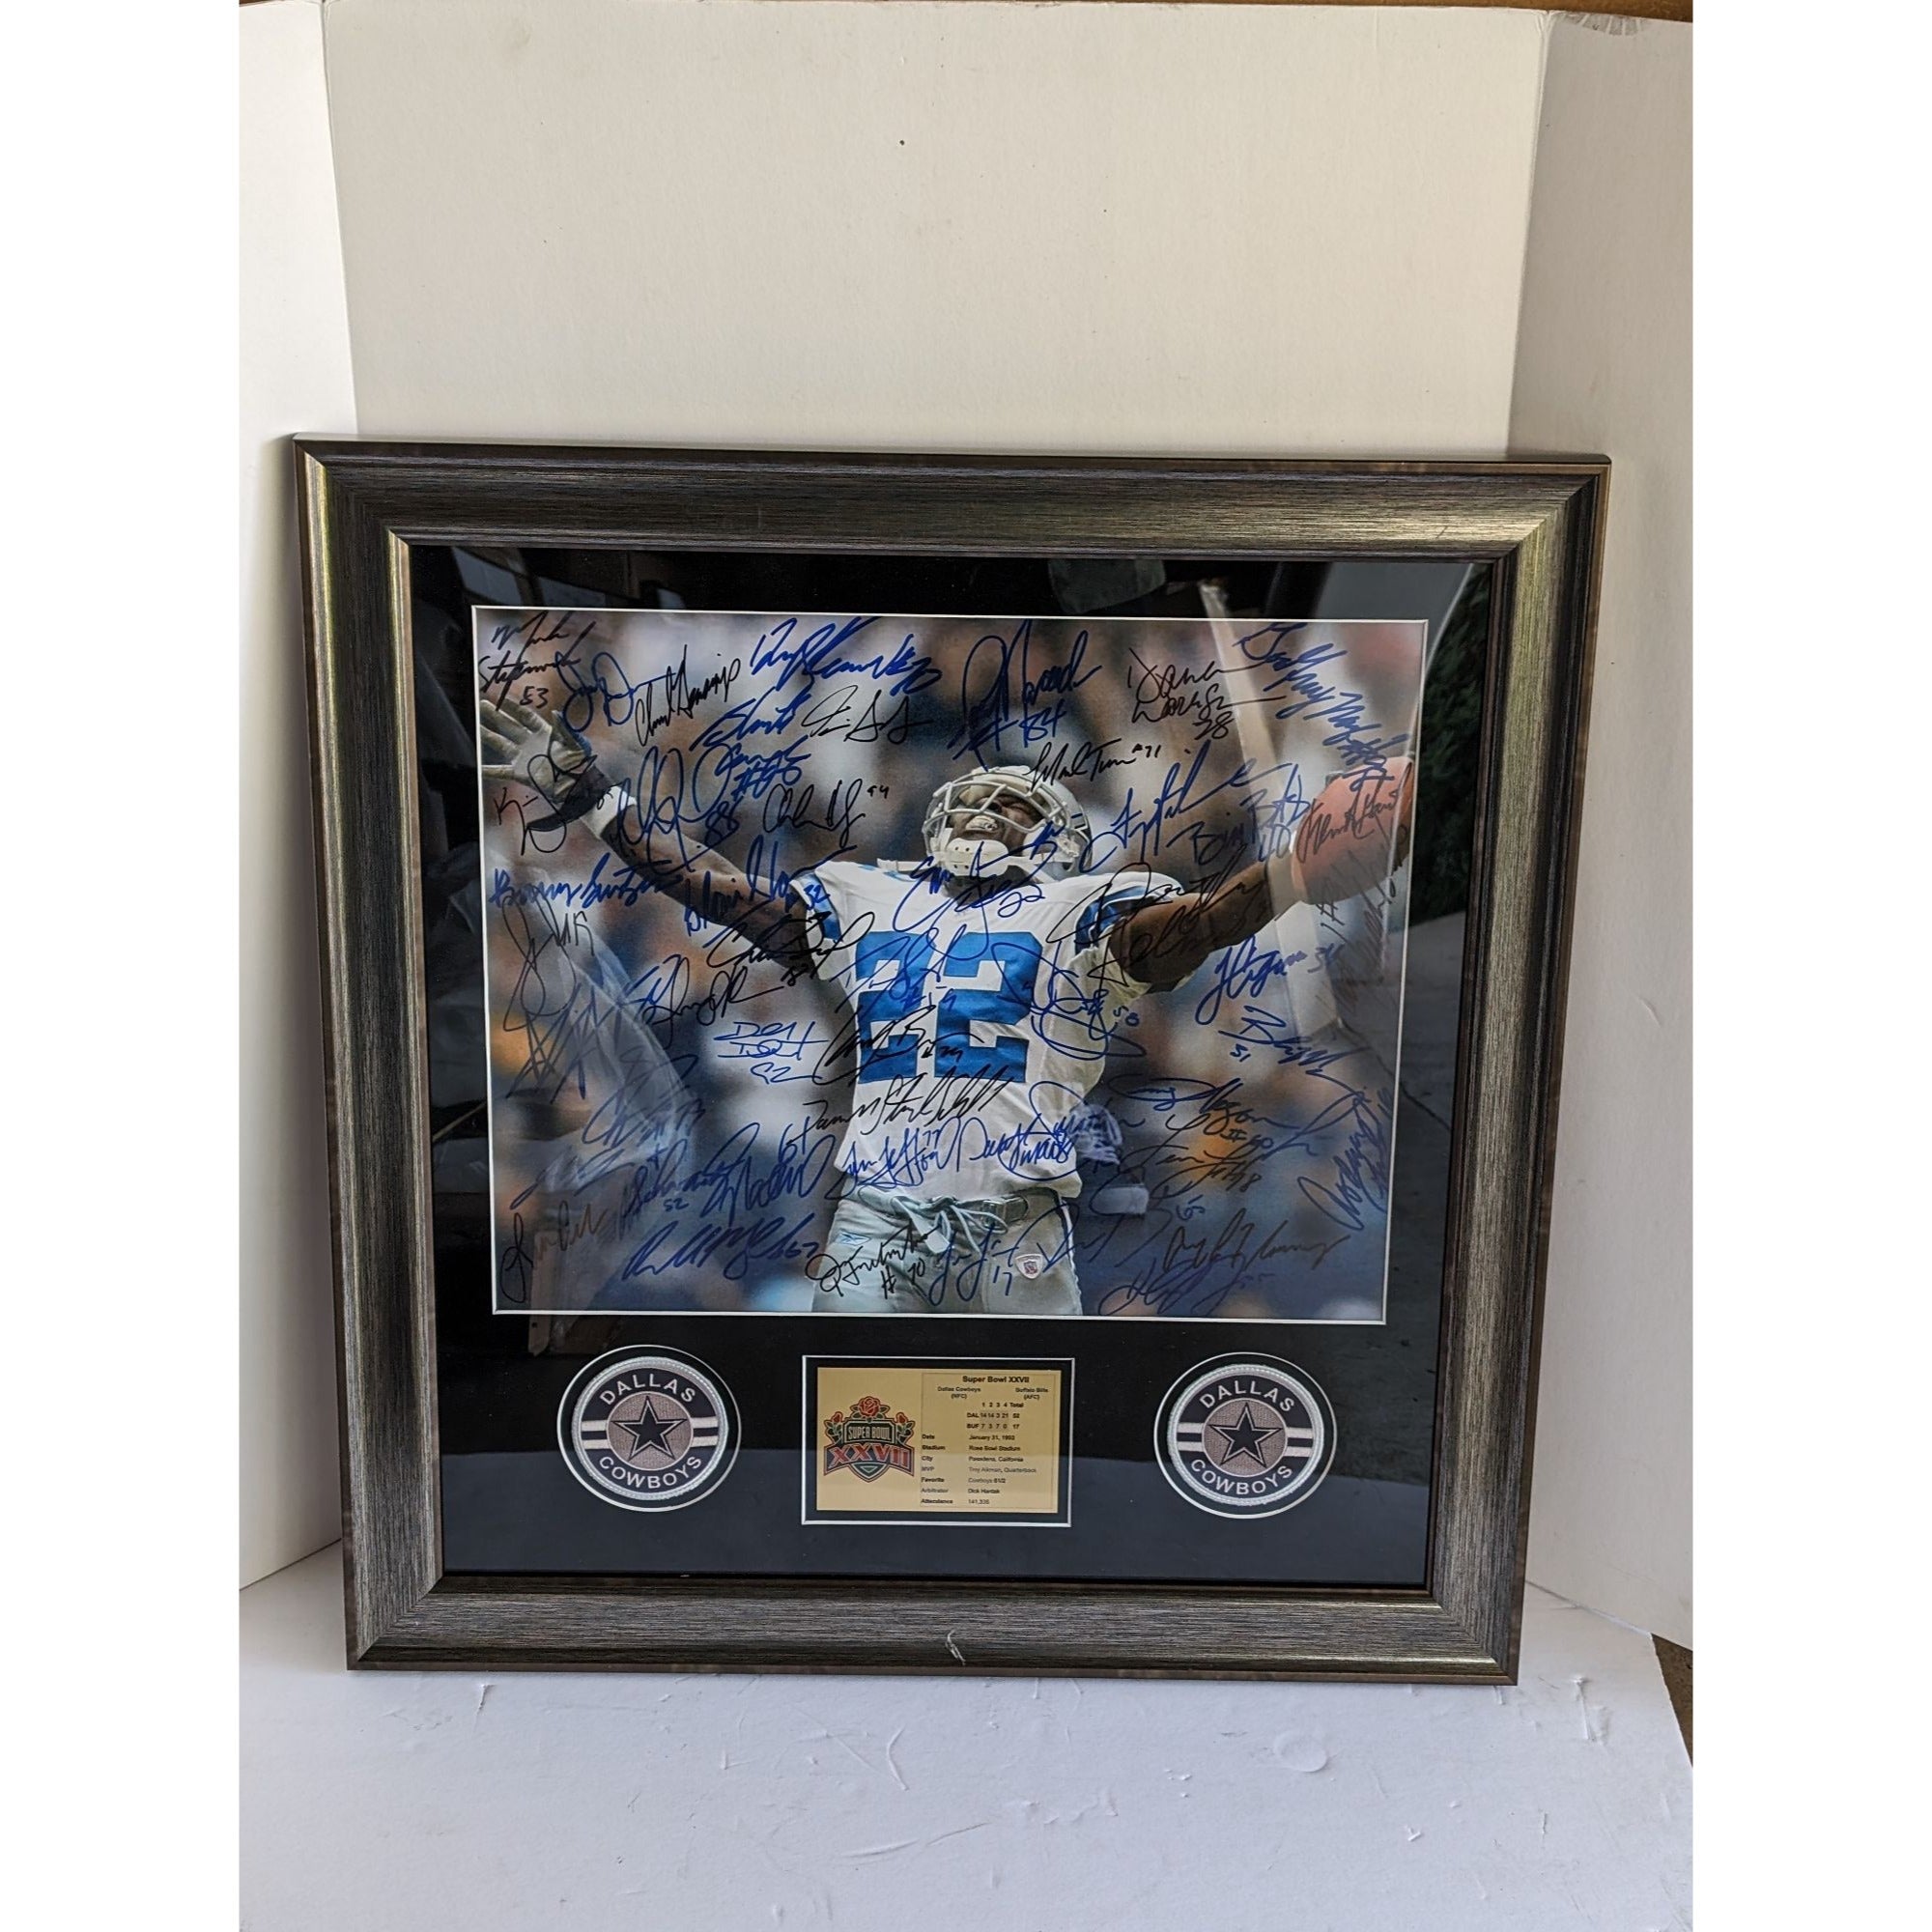 Dallas Cowboys 1992-93 Super Bowl champions team signed photo with proof